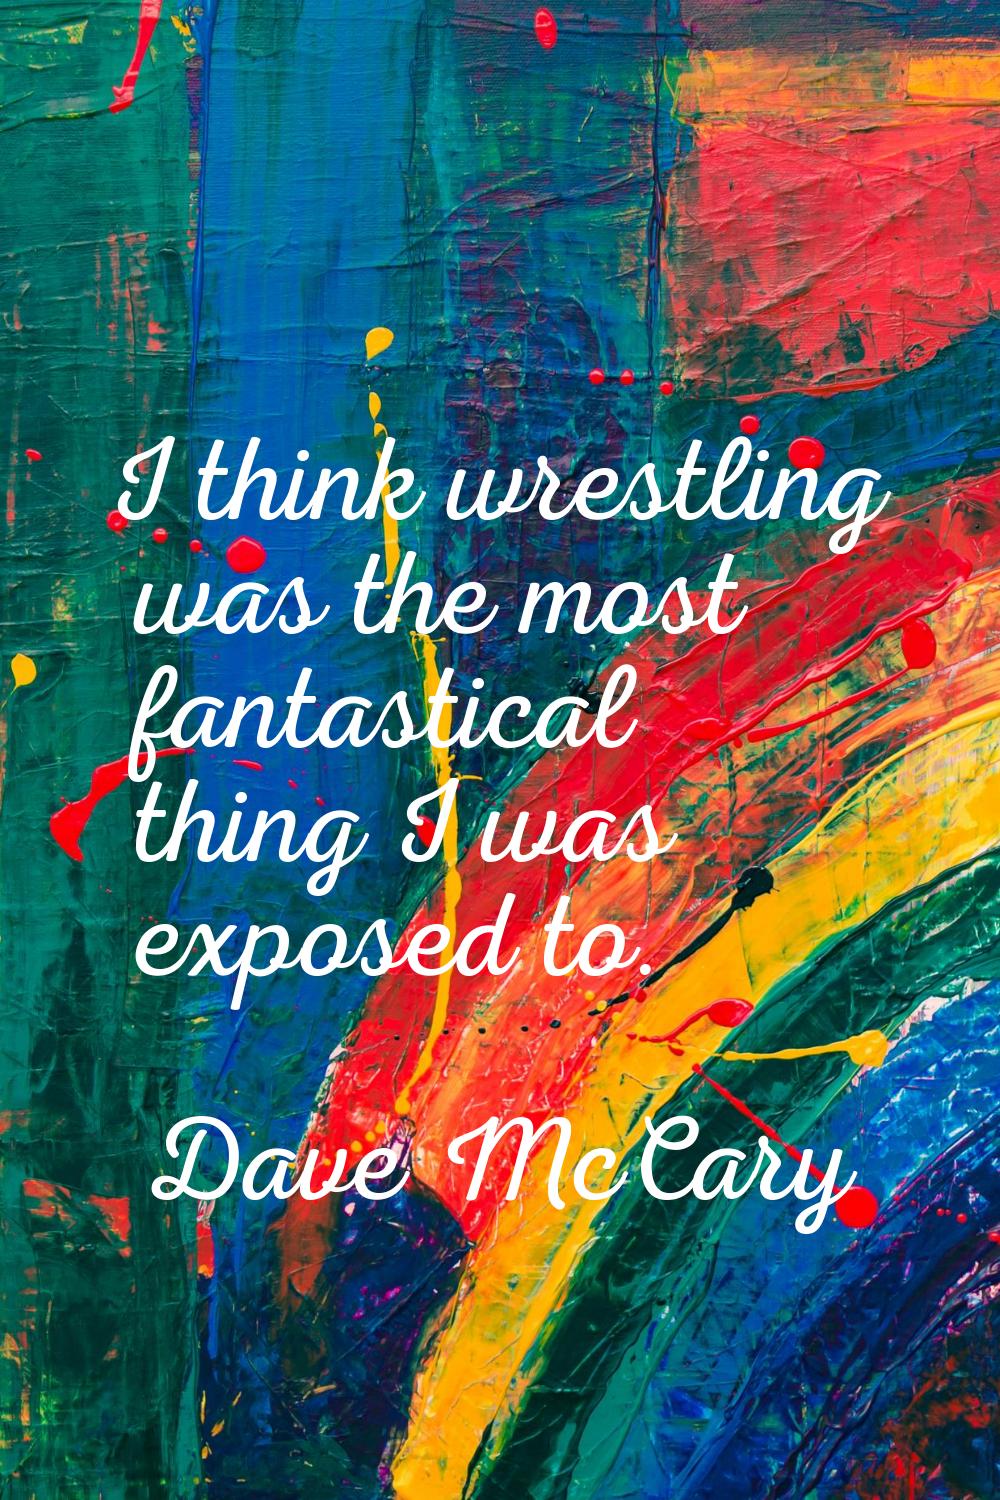 I think wrestling was the most fantastical thing I was exposed to.